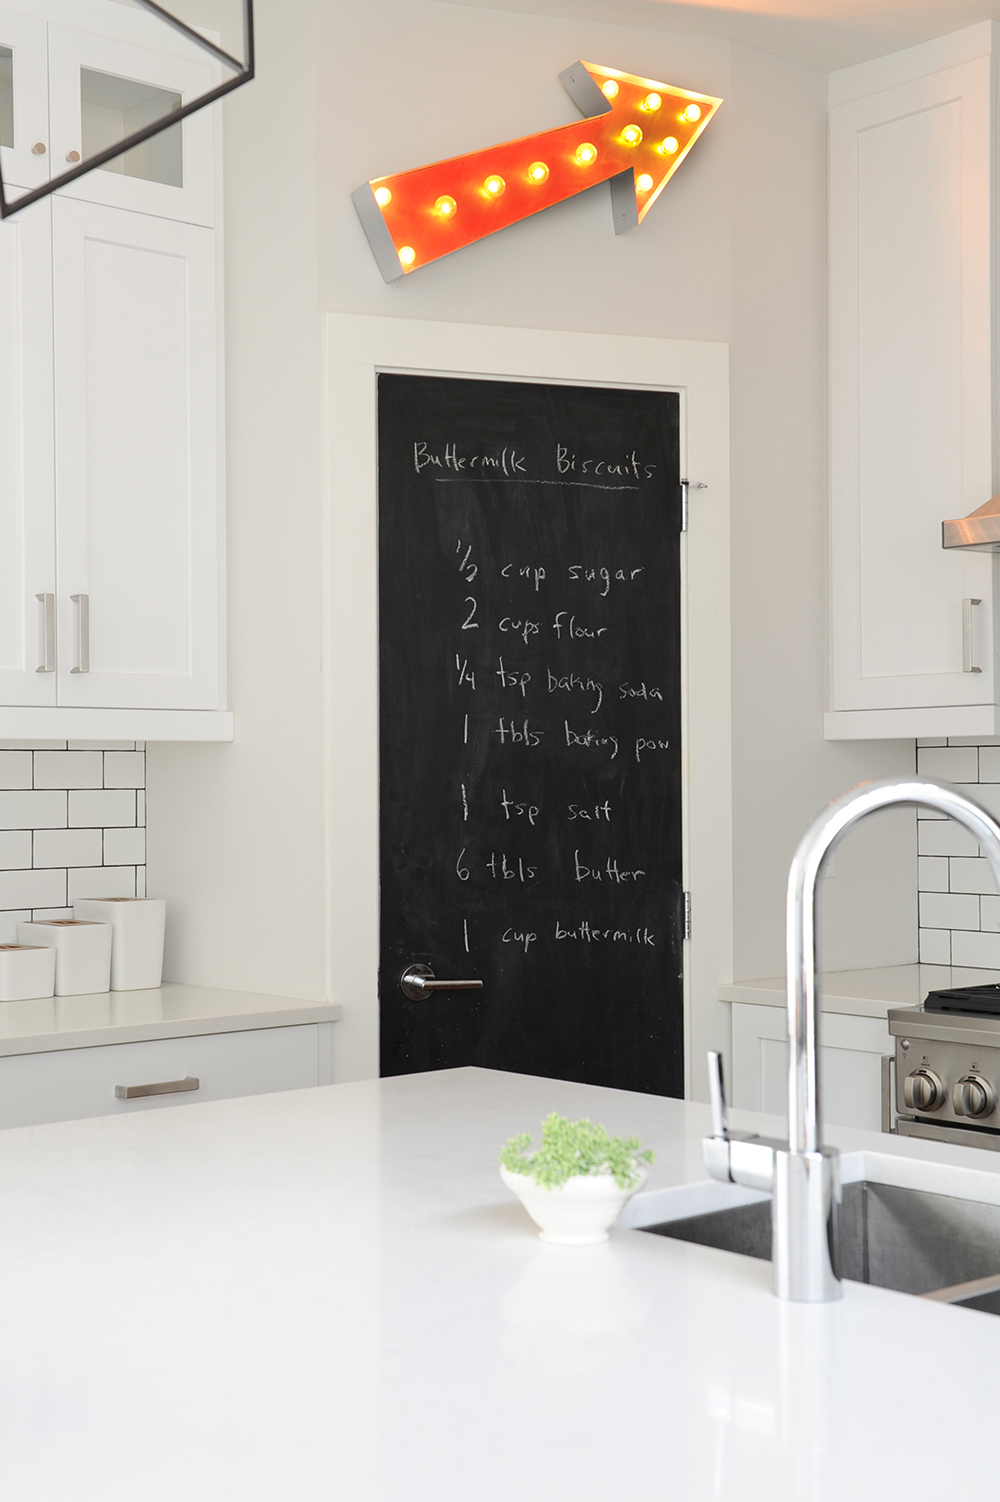 A door painted with chalkboard paint in a tiny kitchen space